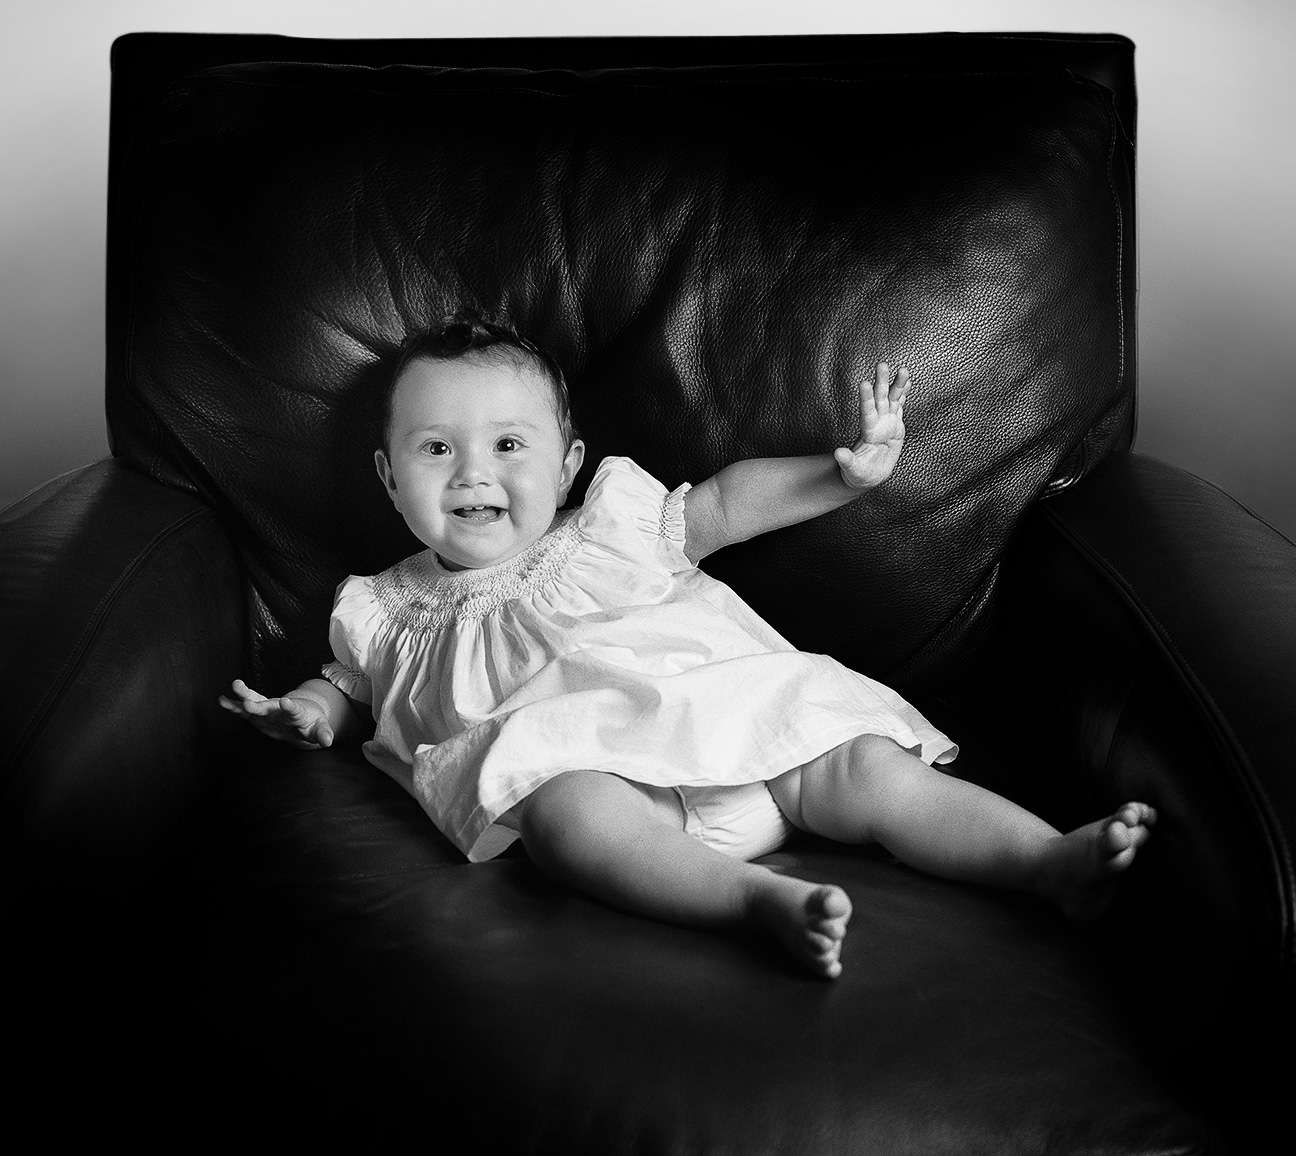 Baby Bella, private commission. : Portraits : New York City based photographer and video specializing in portrait corporate portraits, video, editorial stories for on location and architectural photography